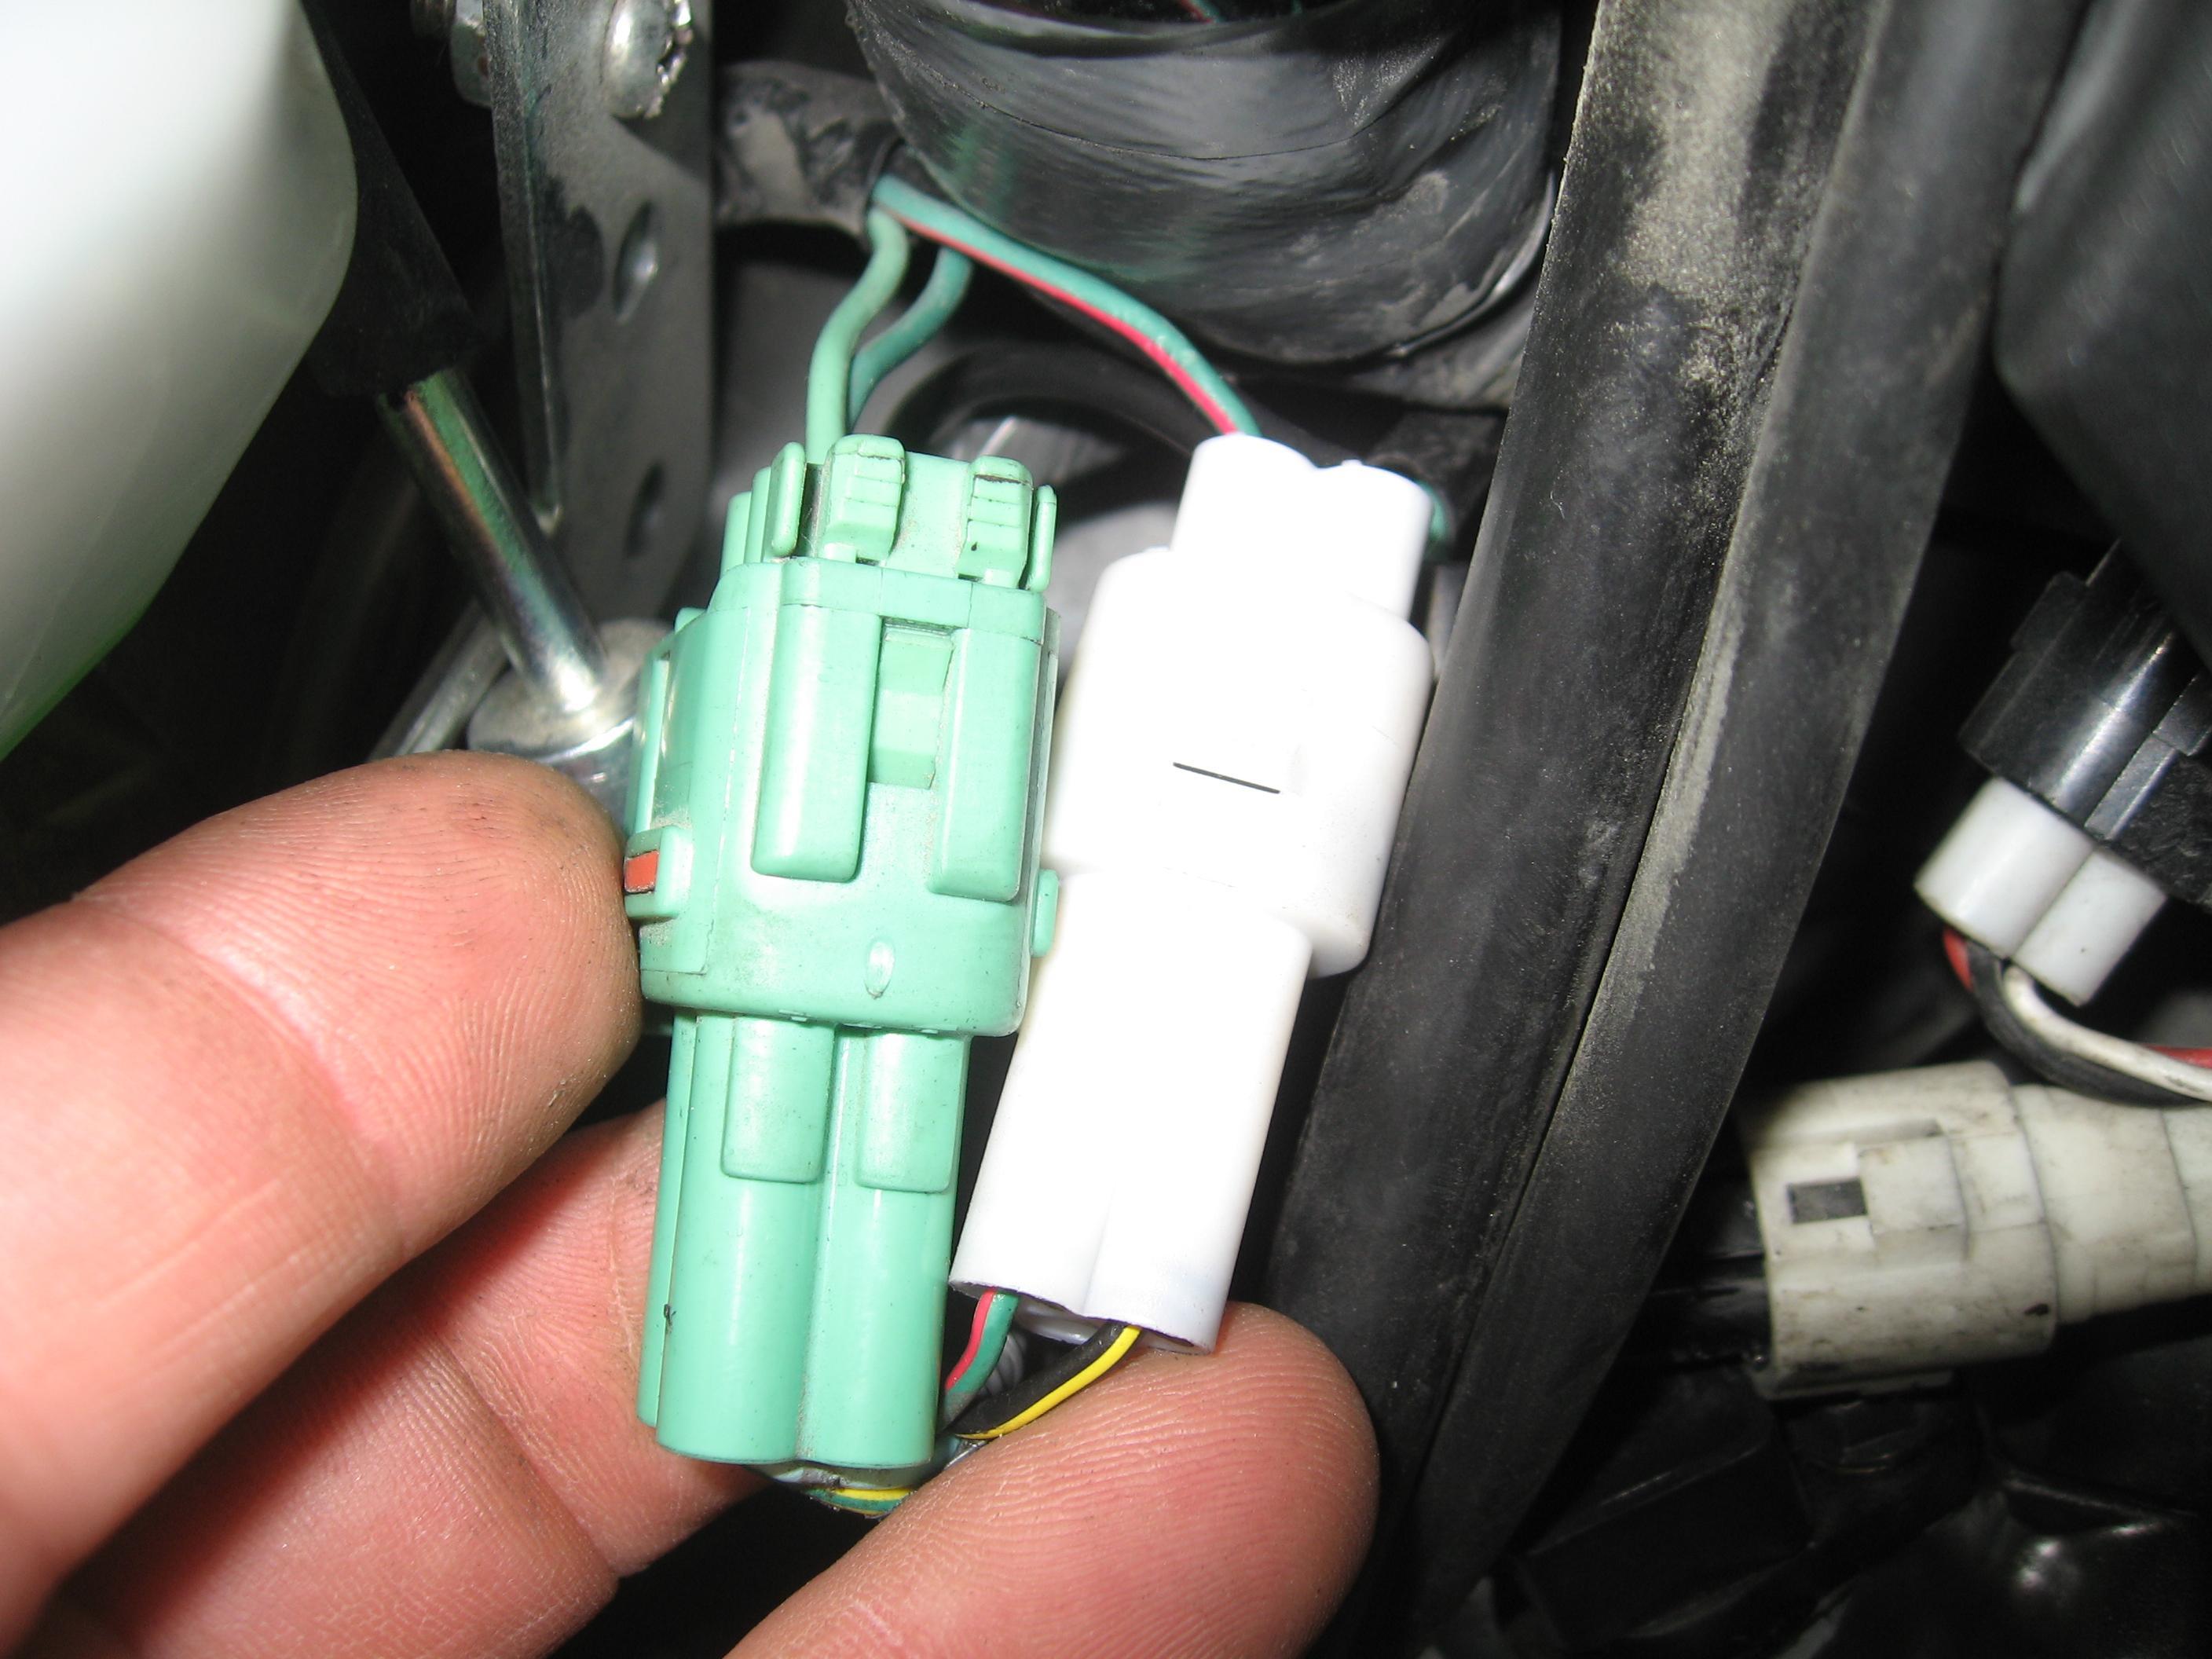 OEM connector in green and GiPro connector in white, all reconnected and ready to go. Now connect the power lead and youre done